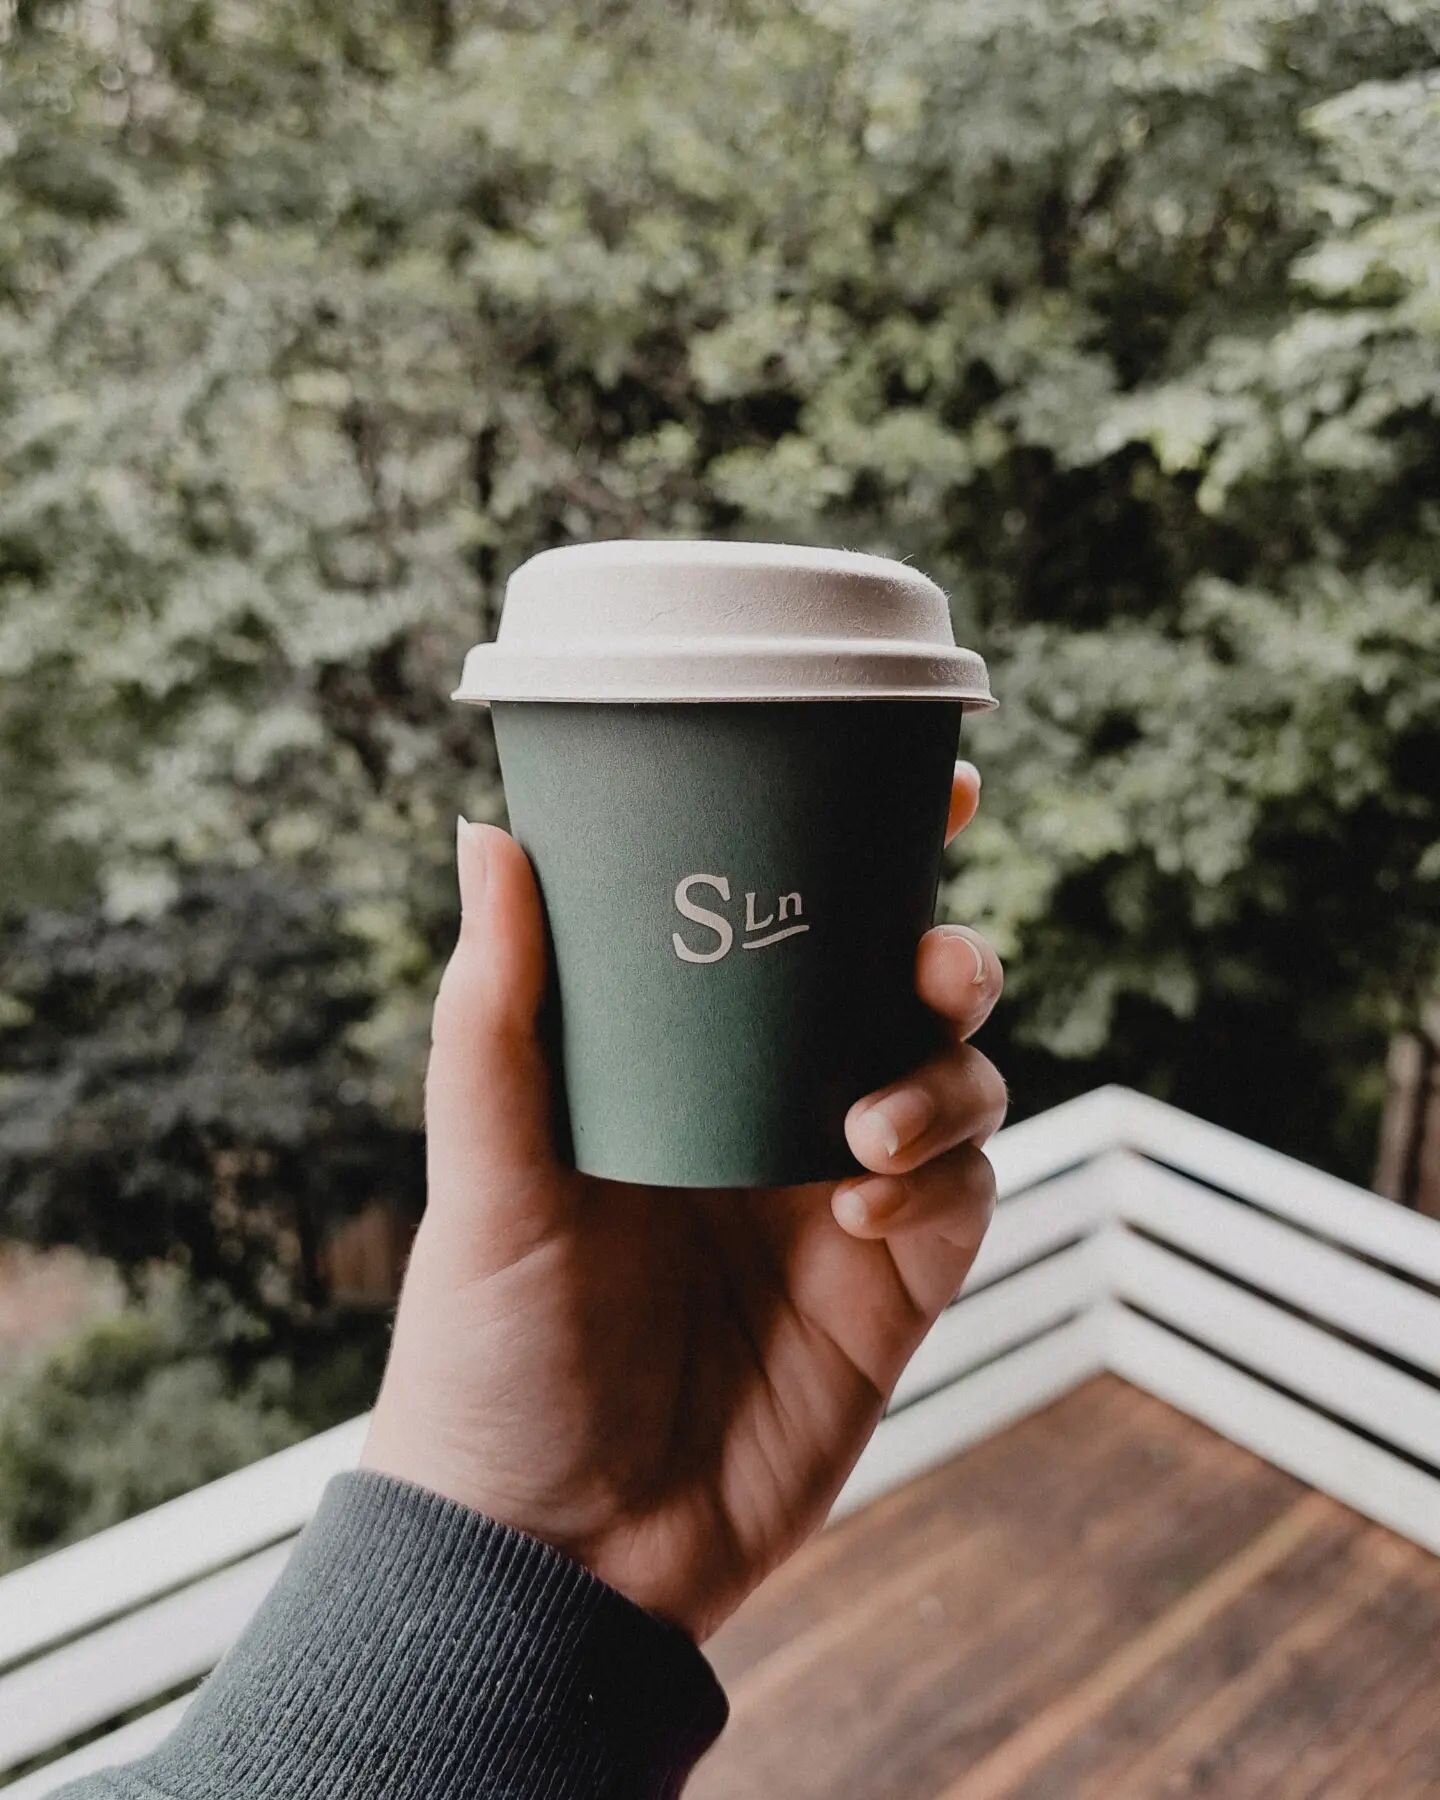 Proximity to @smithslndairy is the biggest perk of wfh. We're stoked to finally see our cup designs for Smiths Ln up close..but even more stoked they come full of @abstract.coffee 

#branding #sydneybrandingagency #packagingdesignday #sydneygraphicde